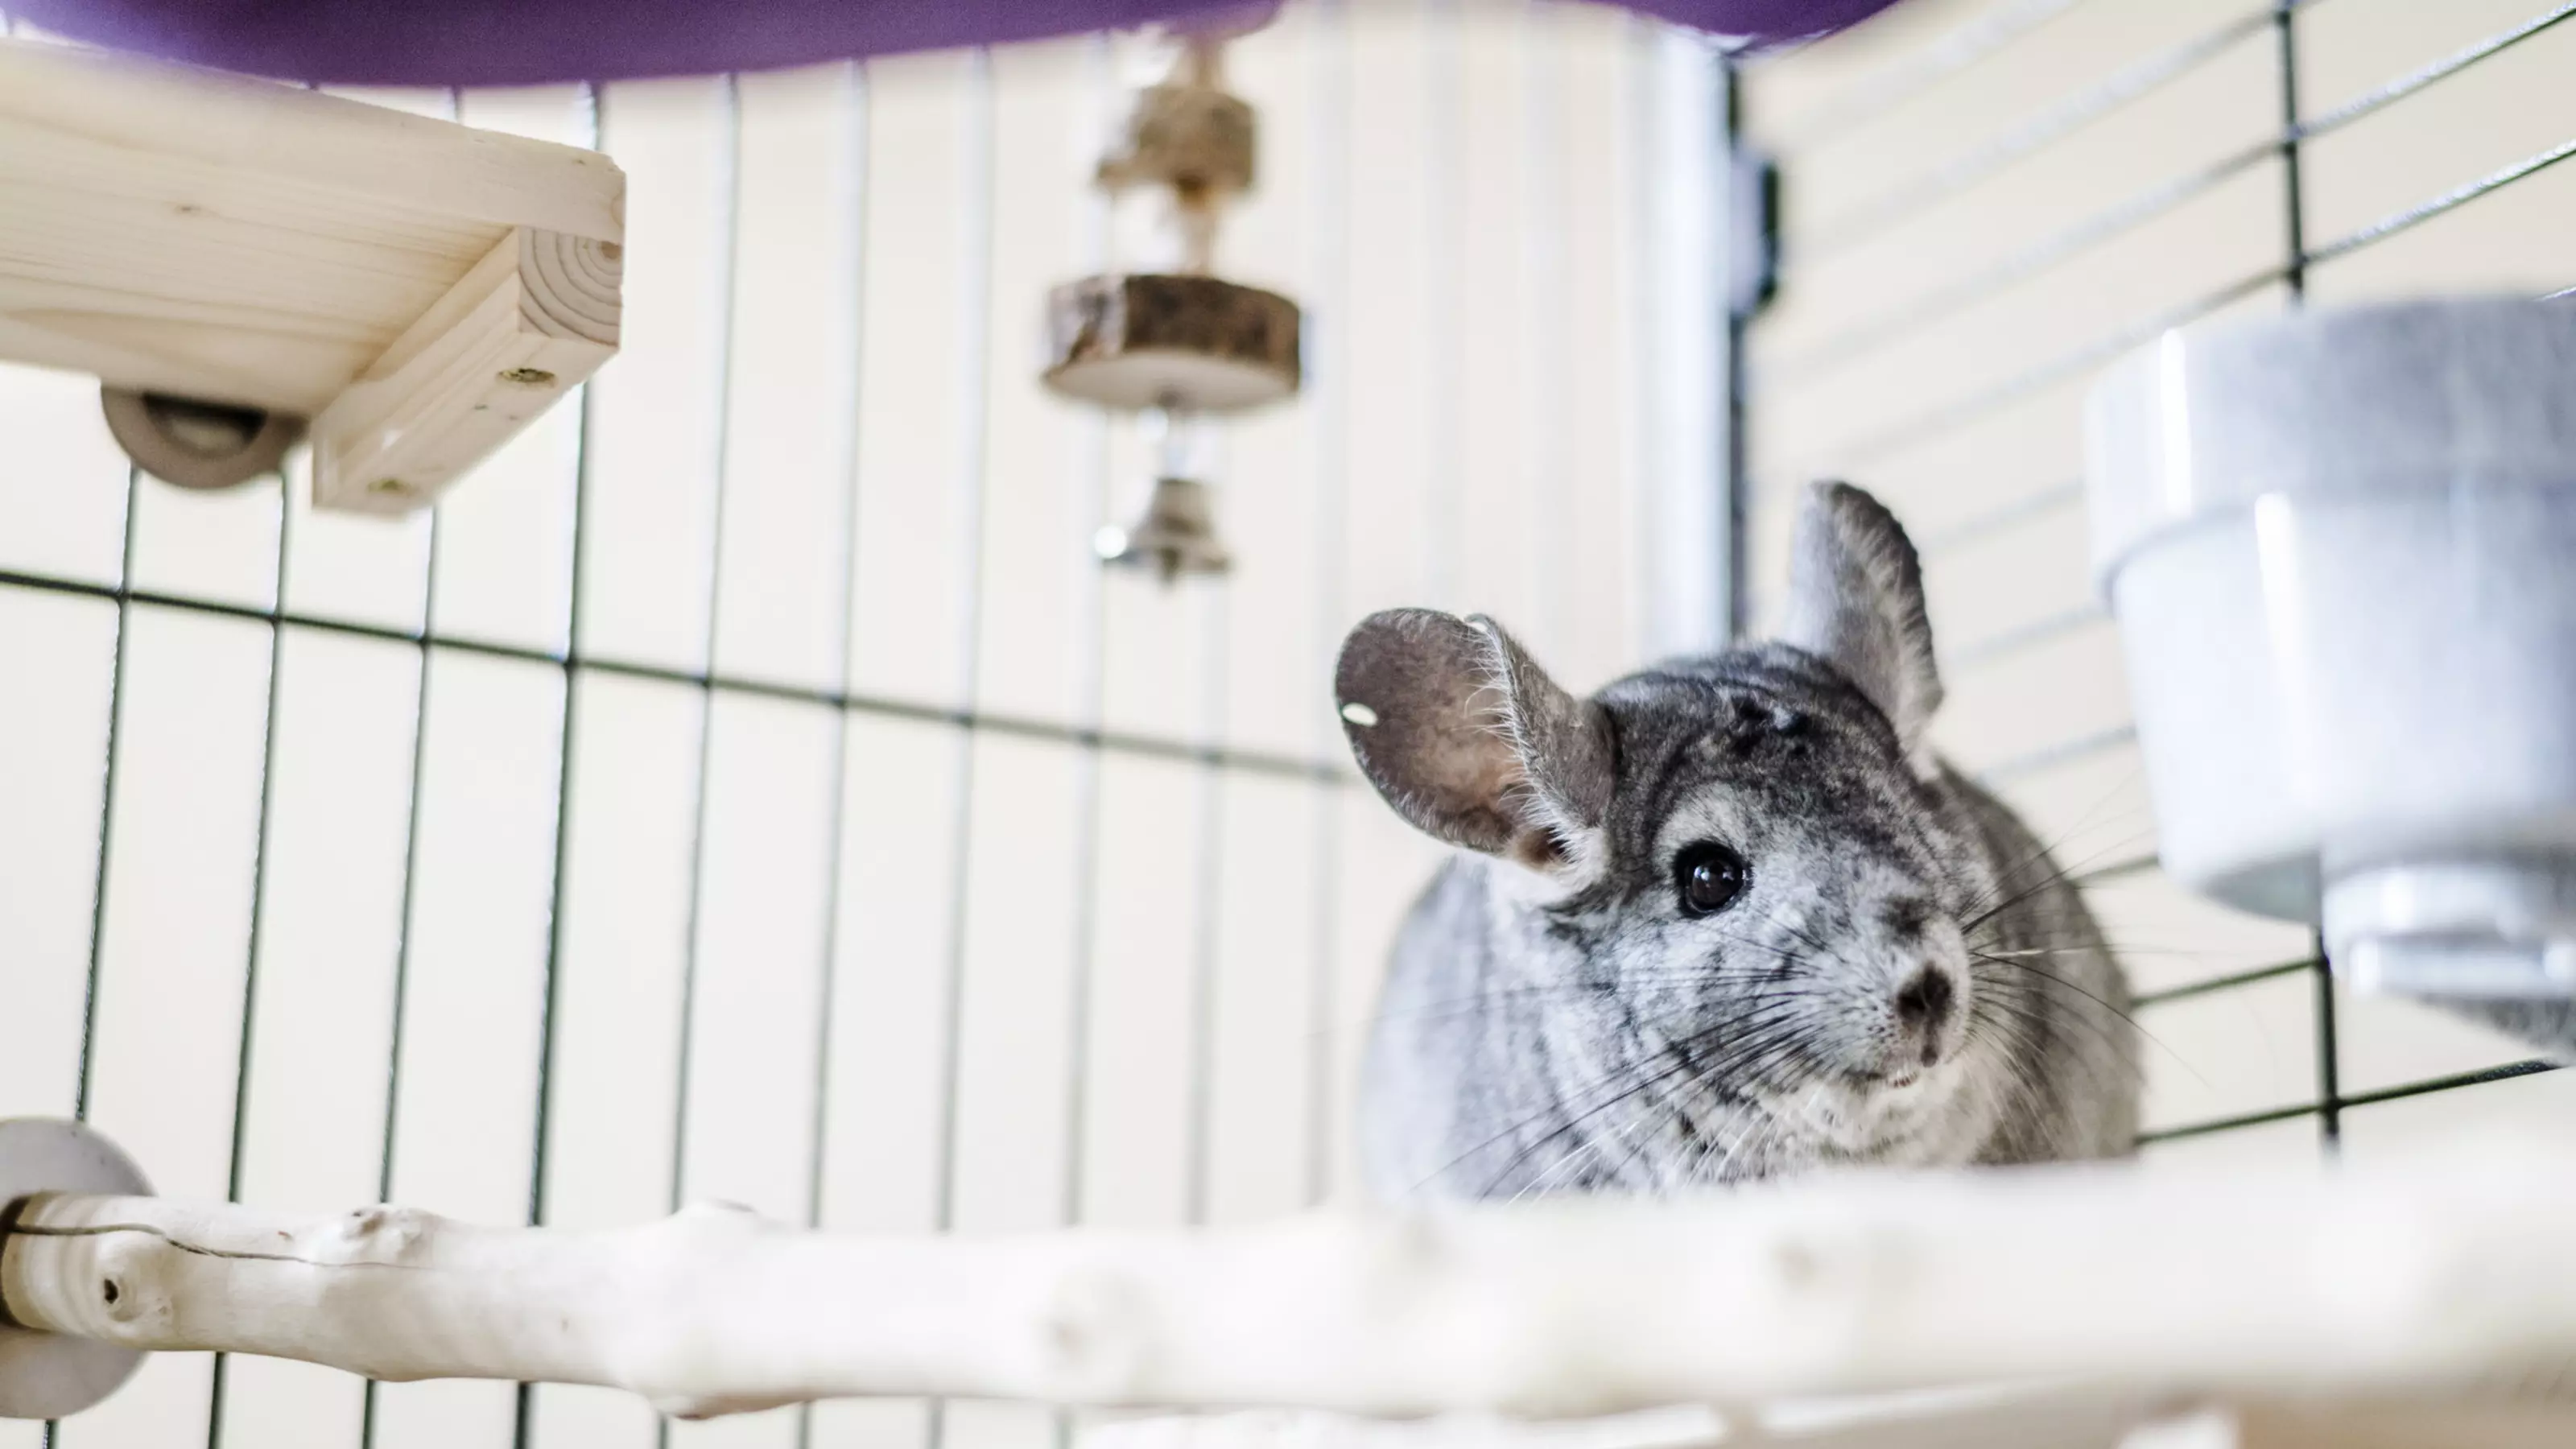 A grey chinchilla in their accommodation, surrounded by wooden toys.